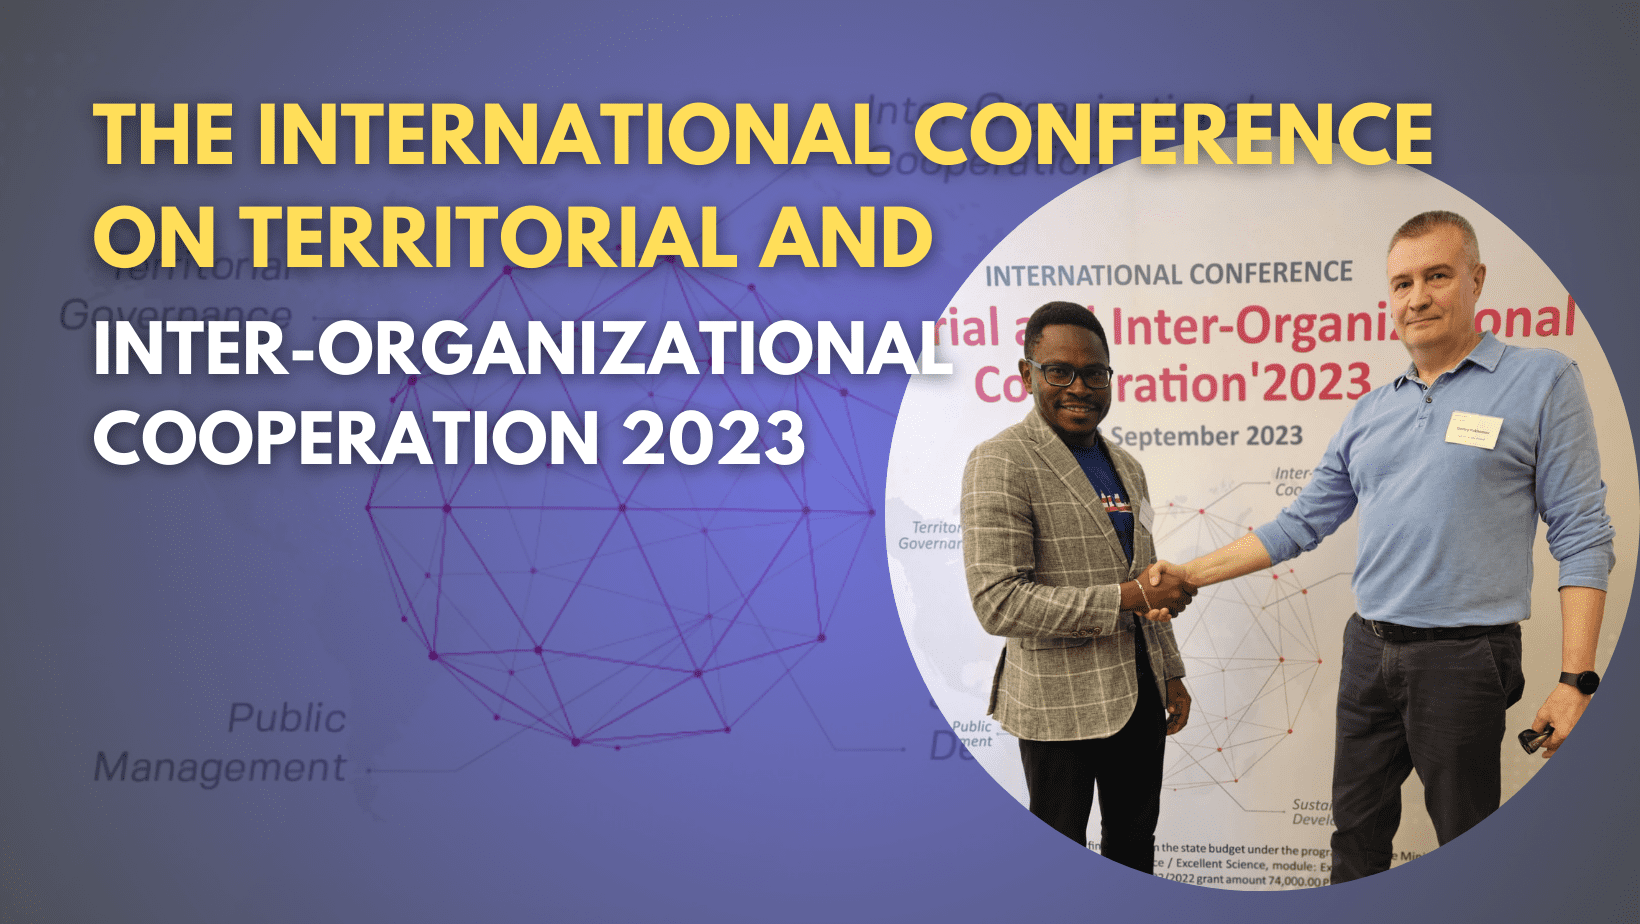 Forging Partnerships: The International Conference on Territorial and Inter-Organizational Cooperation 2023